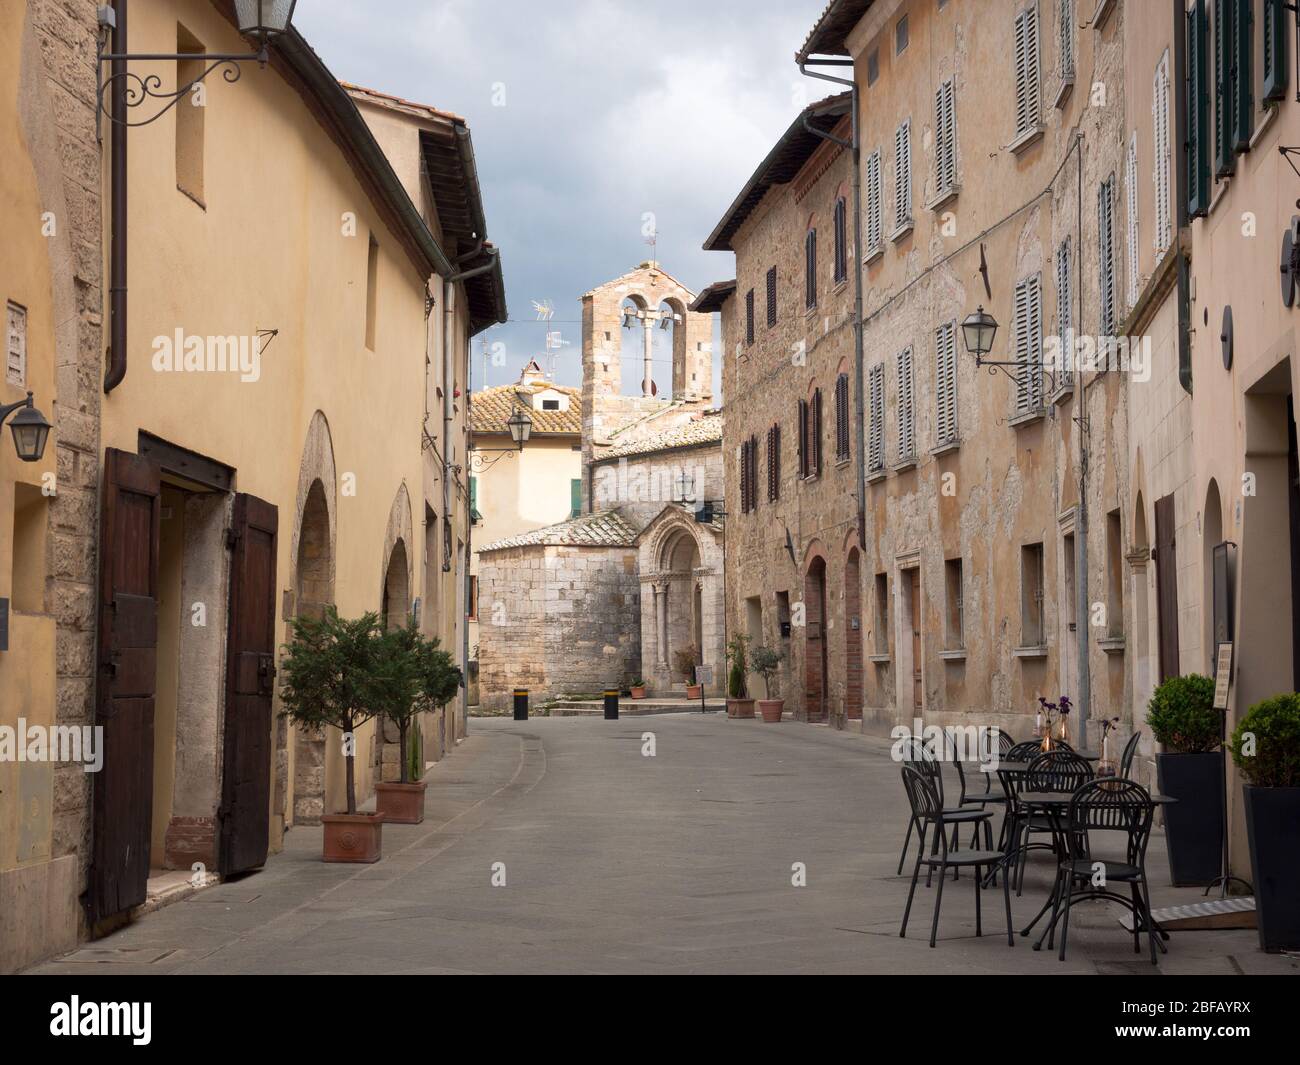 Ancient stone church in San Quirico D'Orcia, a medieval village in the Tuscan hills. Stock Photo